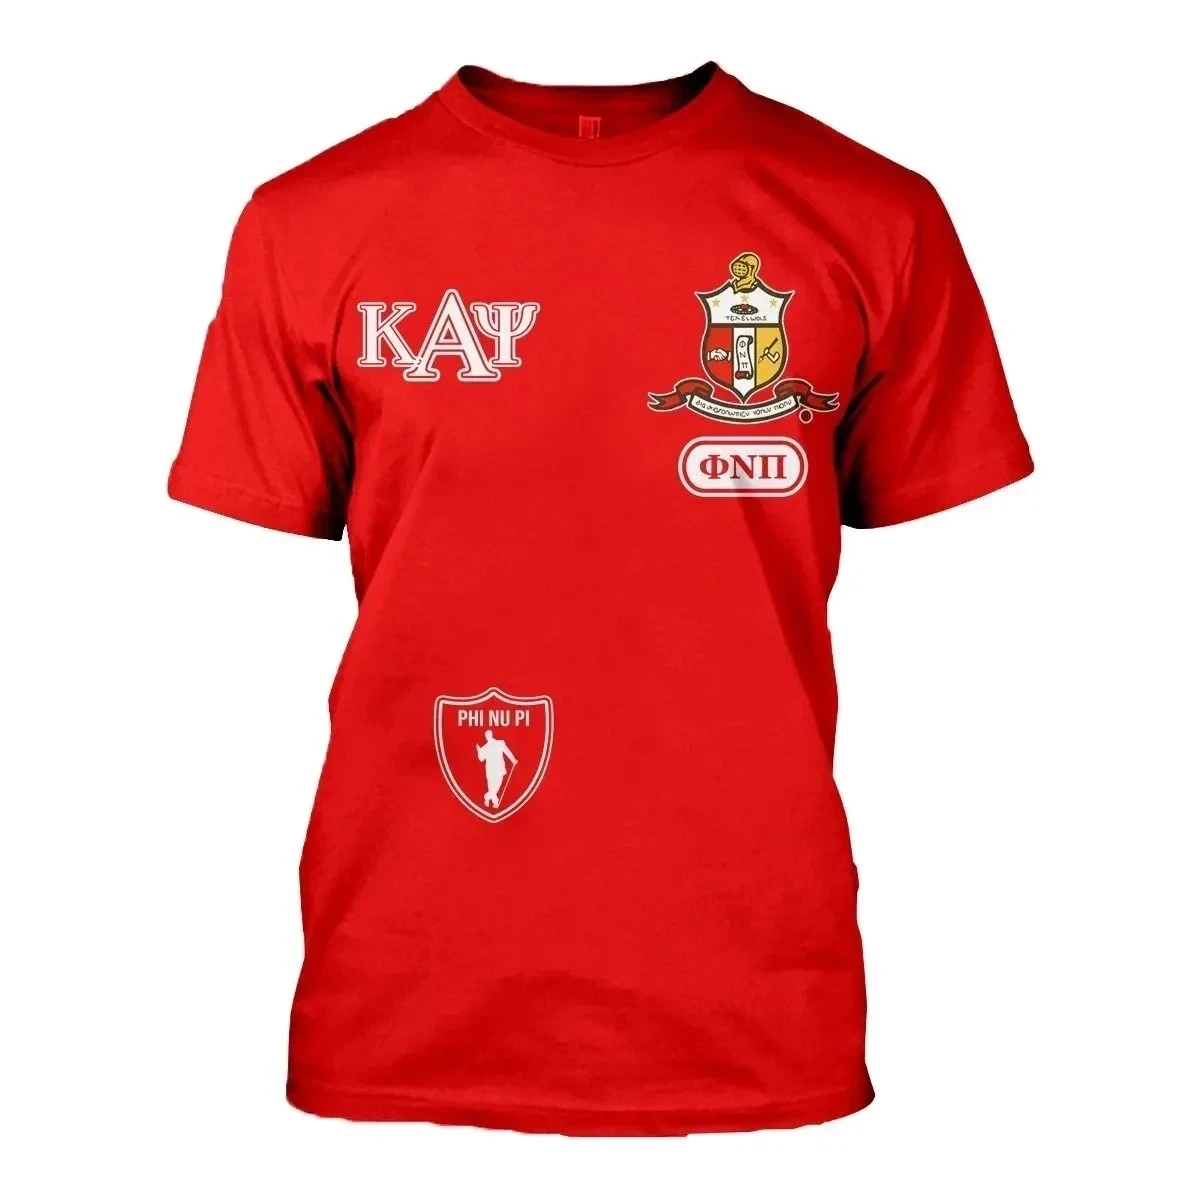 African T-shirt – Unique Kap Nupe Fraternity Tee